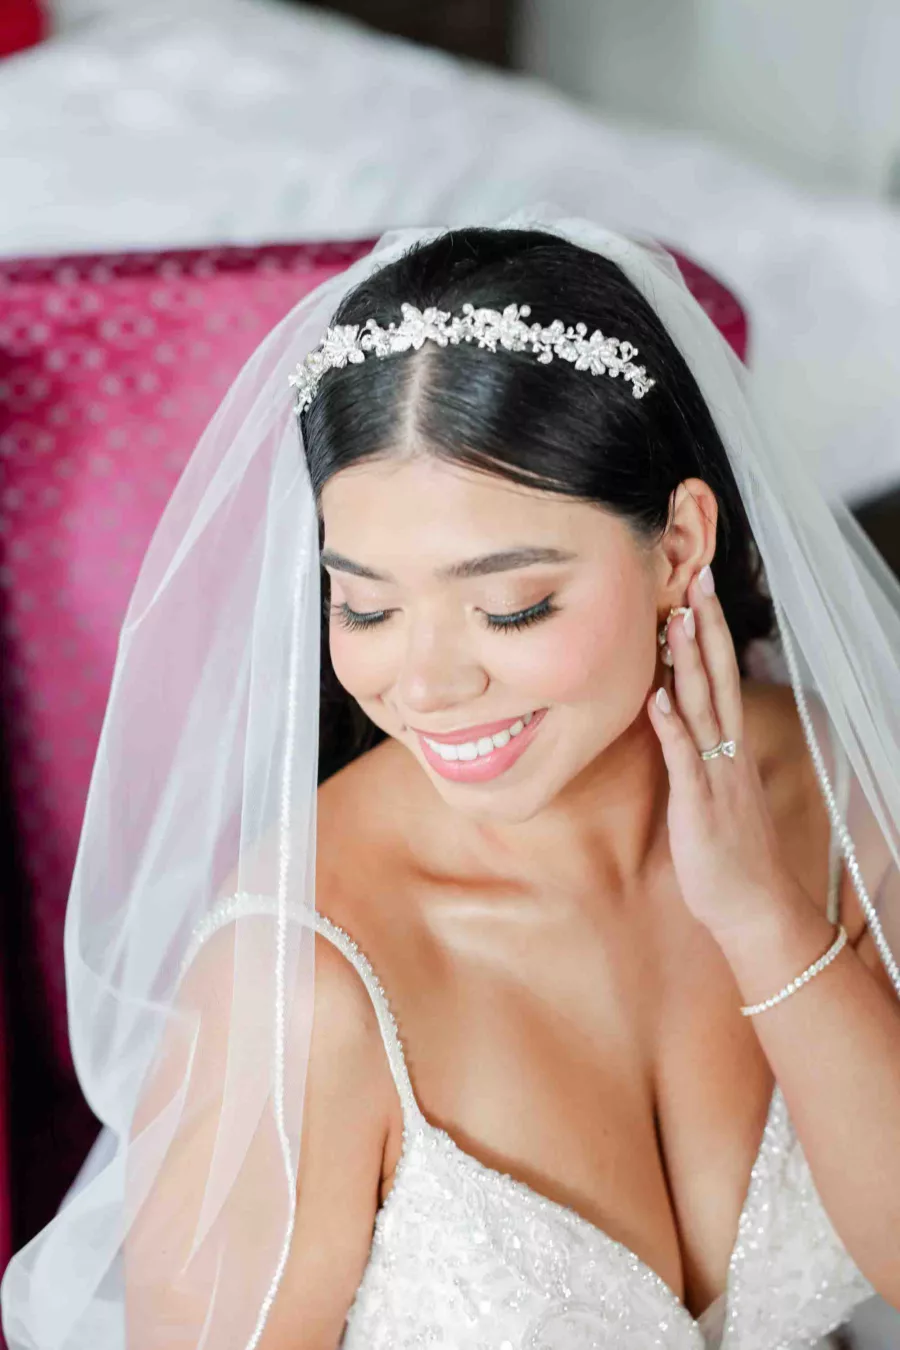 Classic Bridal Hair and Makeup Inspiration | Crystal Hairpiece Ideas